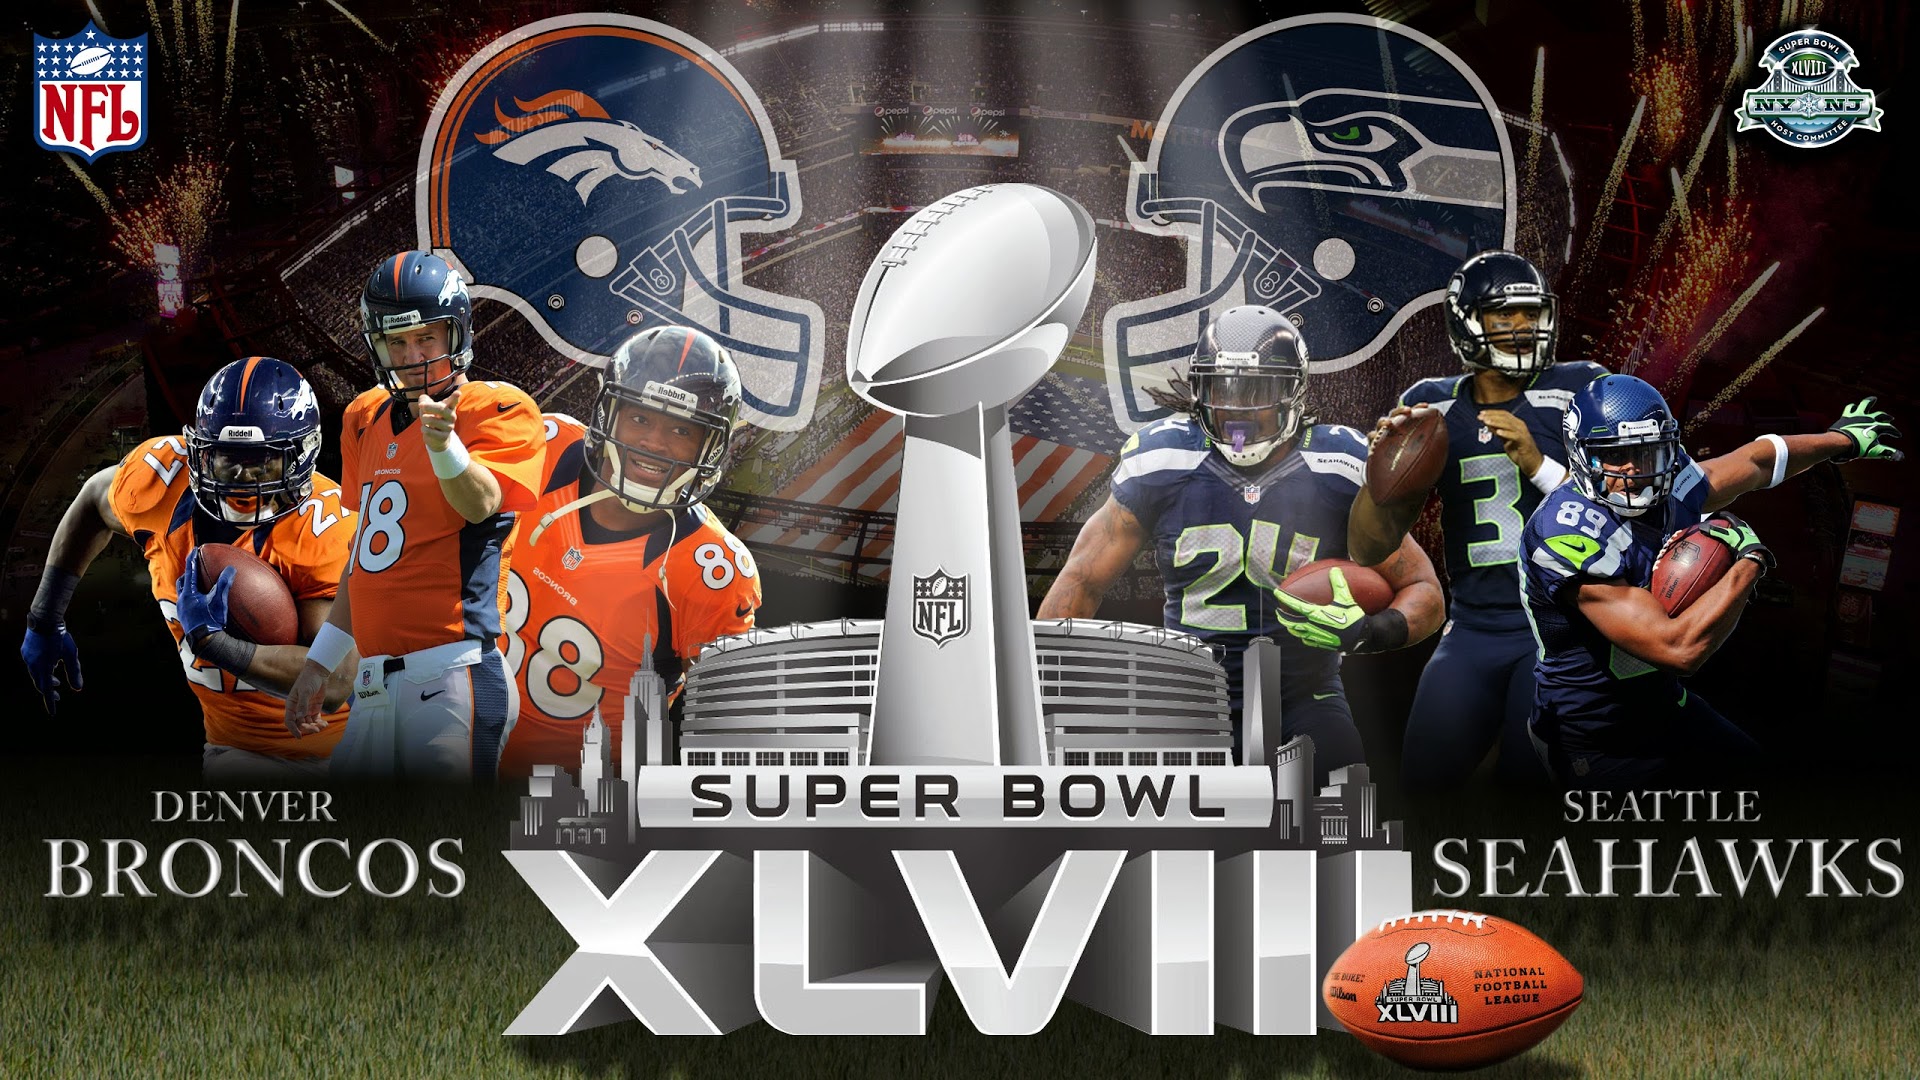 Image Nfl Super Bowl Pc Android iPhone And iPad Wallpaper